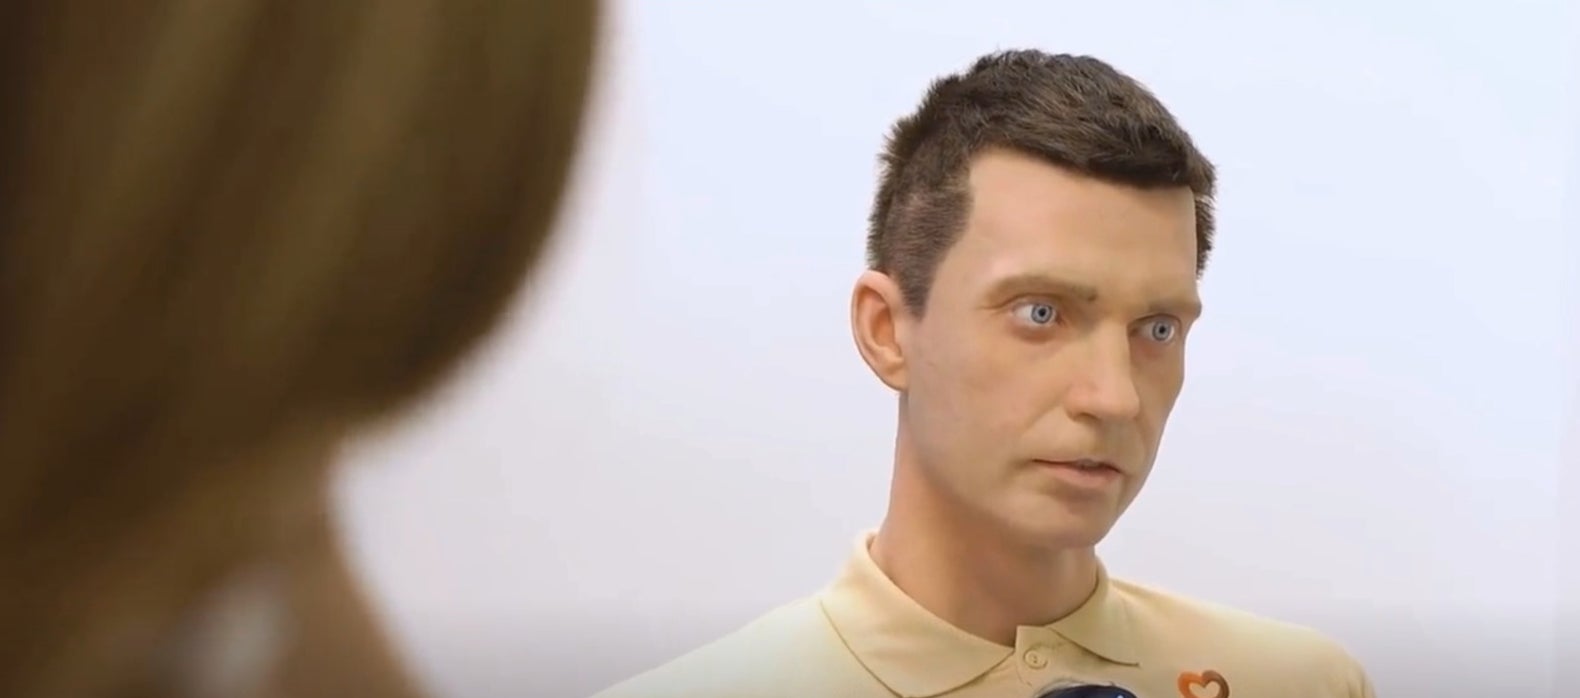 You can get paid £150,000 for letting a robot use your face and voice